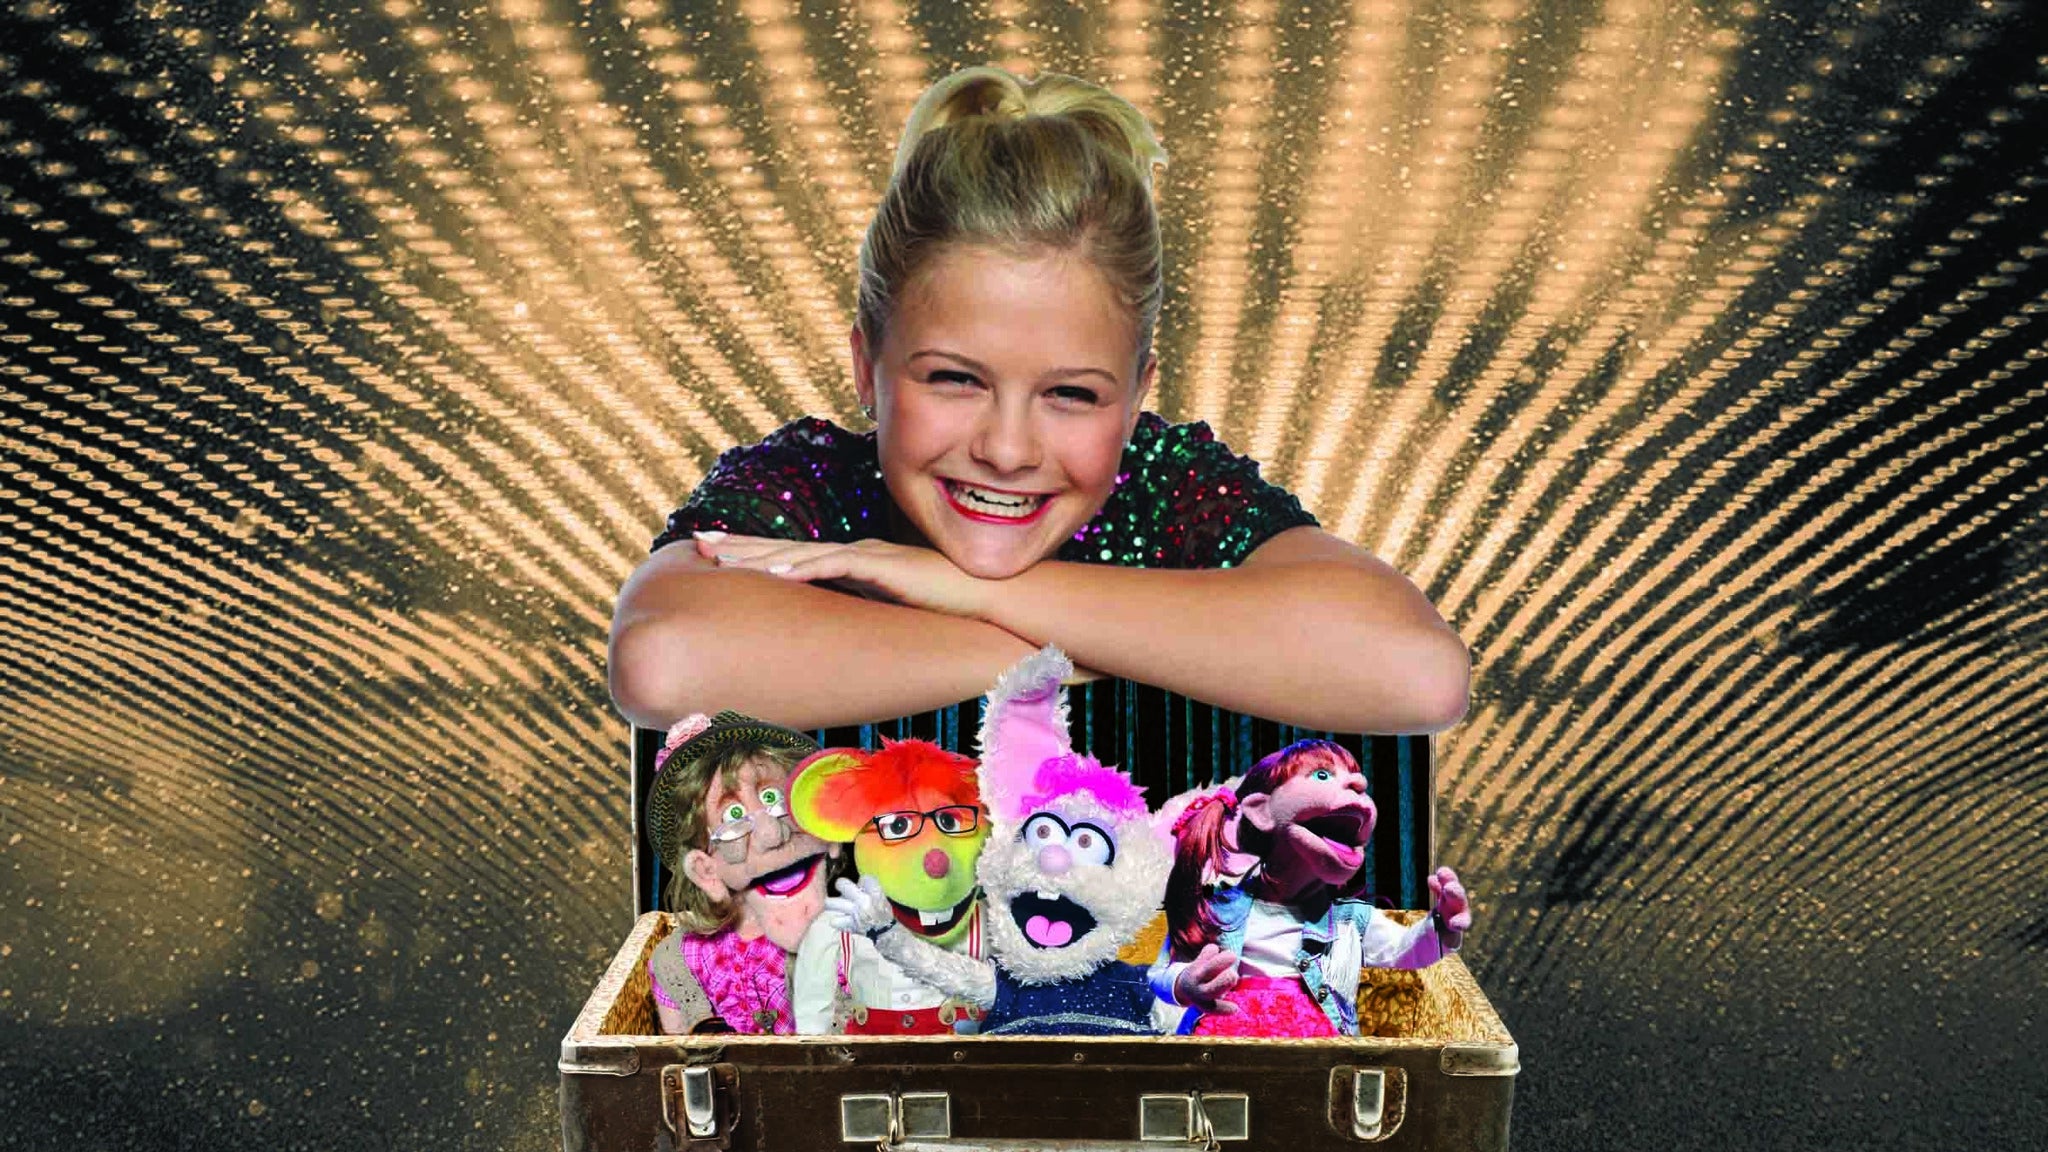 Darci Lynne: My Lips Are Sealed (Except When They're Not) in Reno promo photo for Artist presale offer code